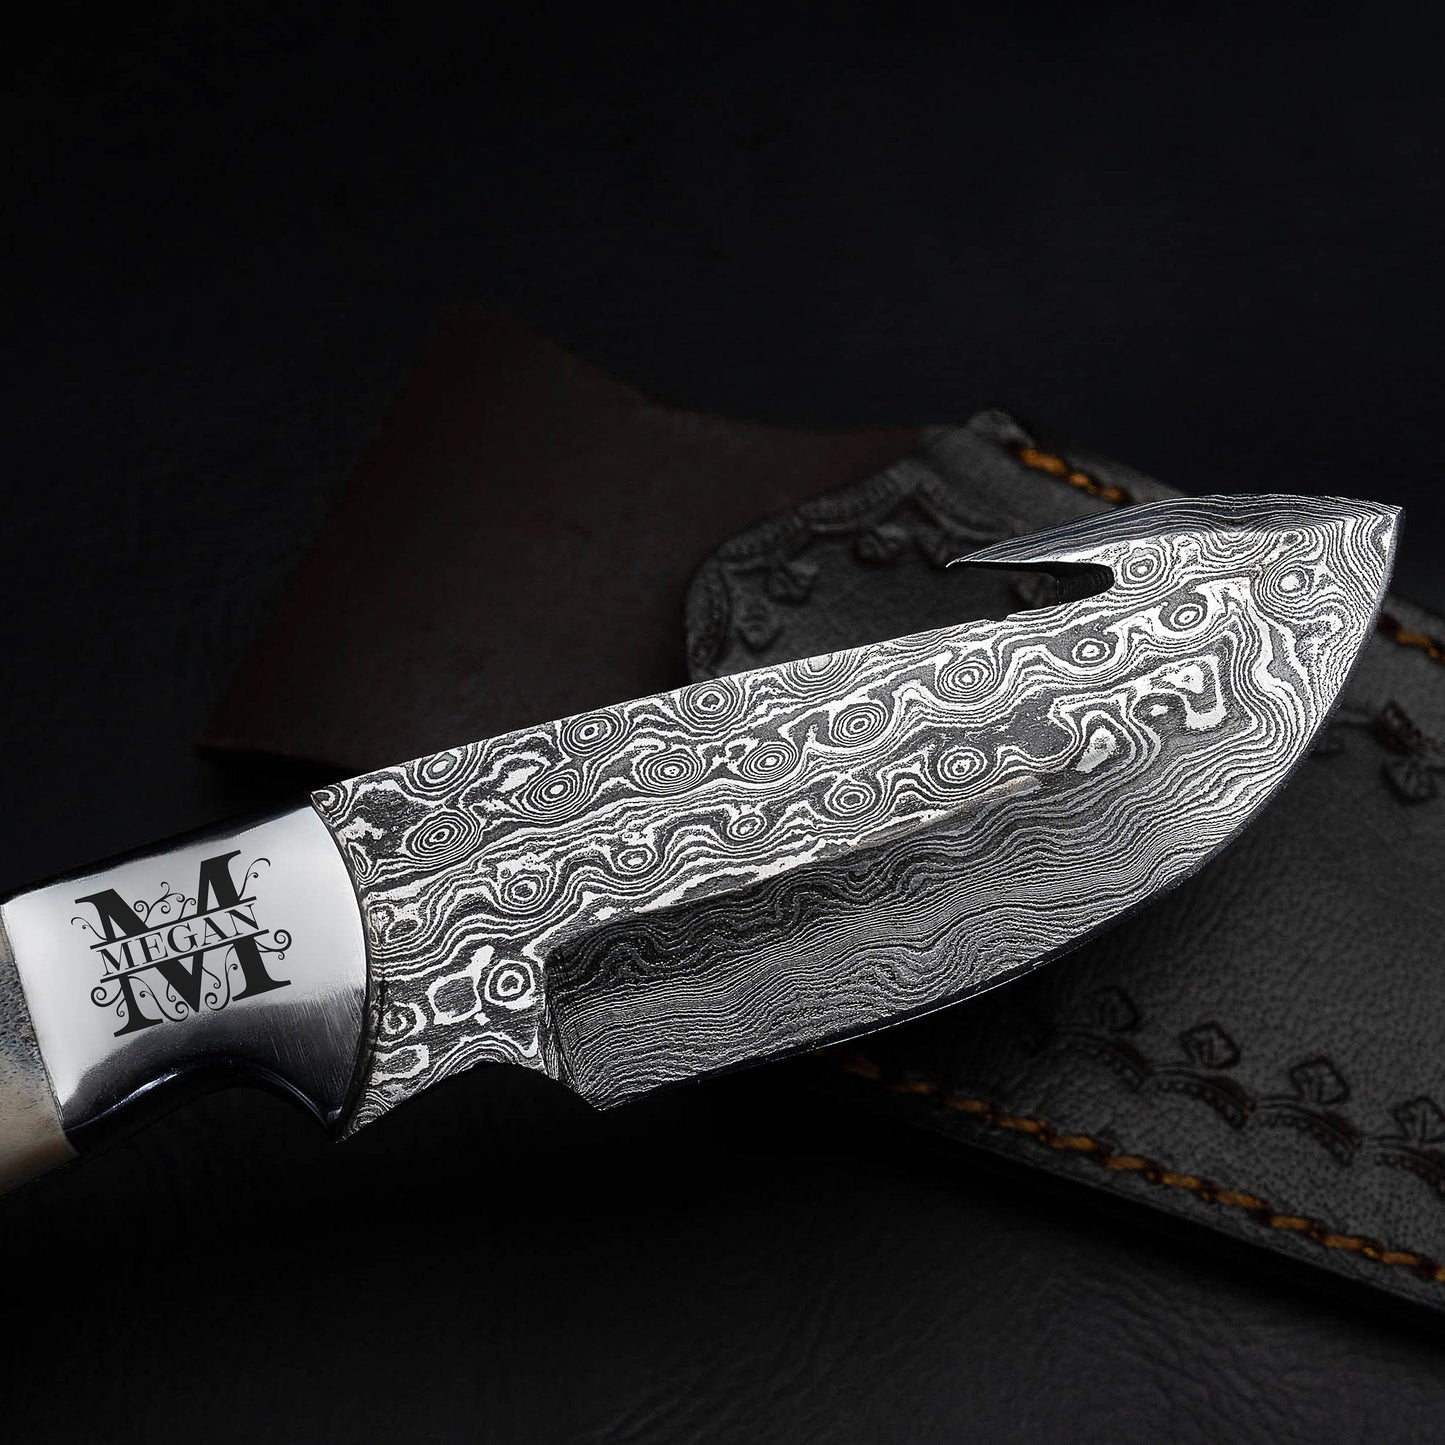 Gut Hook Bone Wood Handle Fixed Blade Full Tang Hunting/Camping Knife - Authentic Damascus 8.5" Knife by morfsteelware Gift for Him, Dad